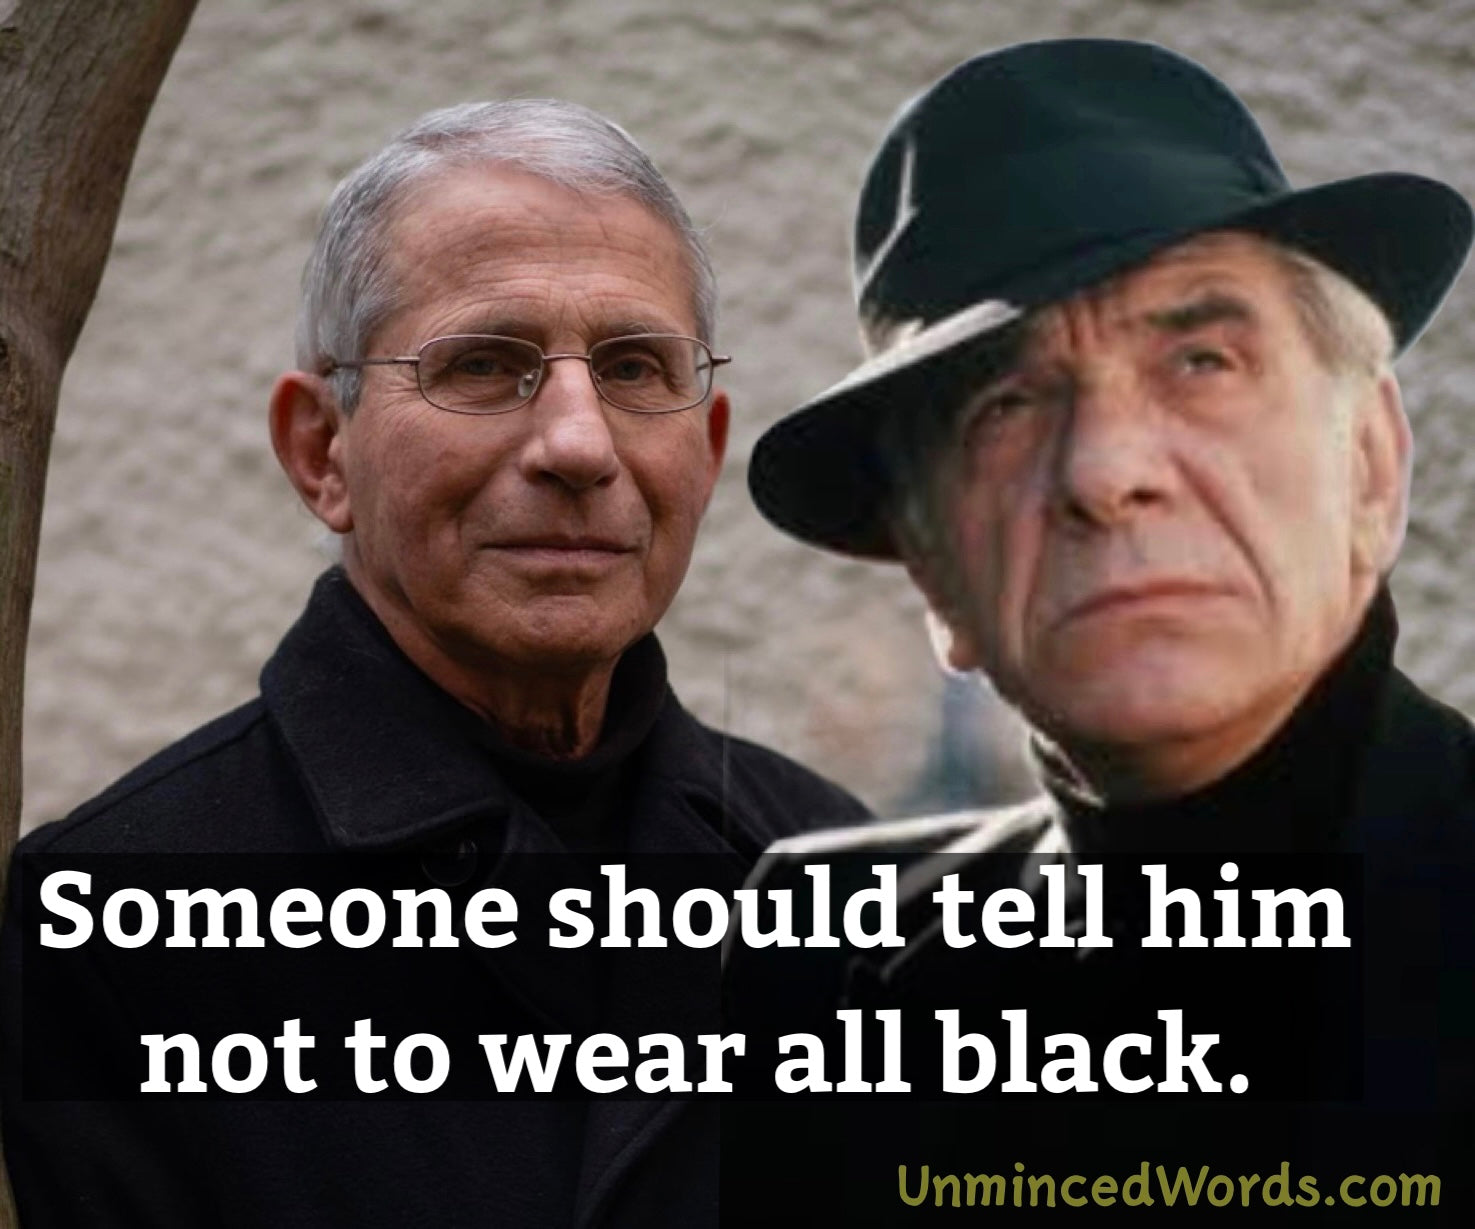 Why Fauci should reconsider wearing all black